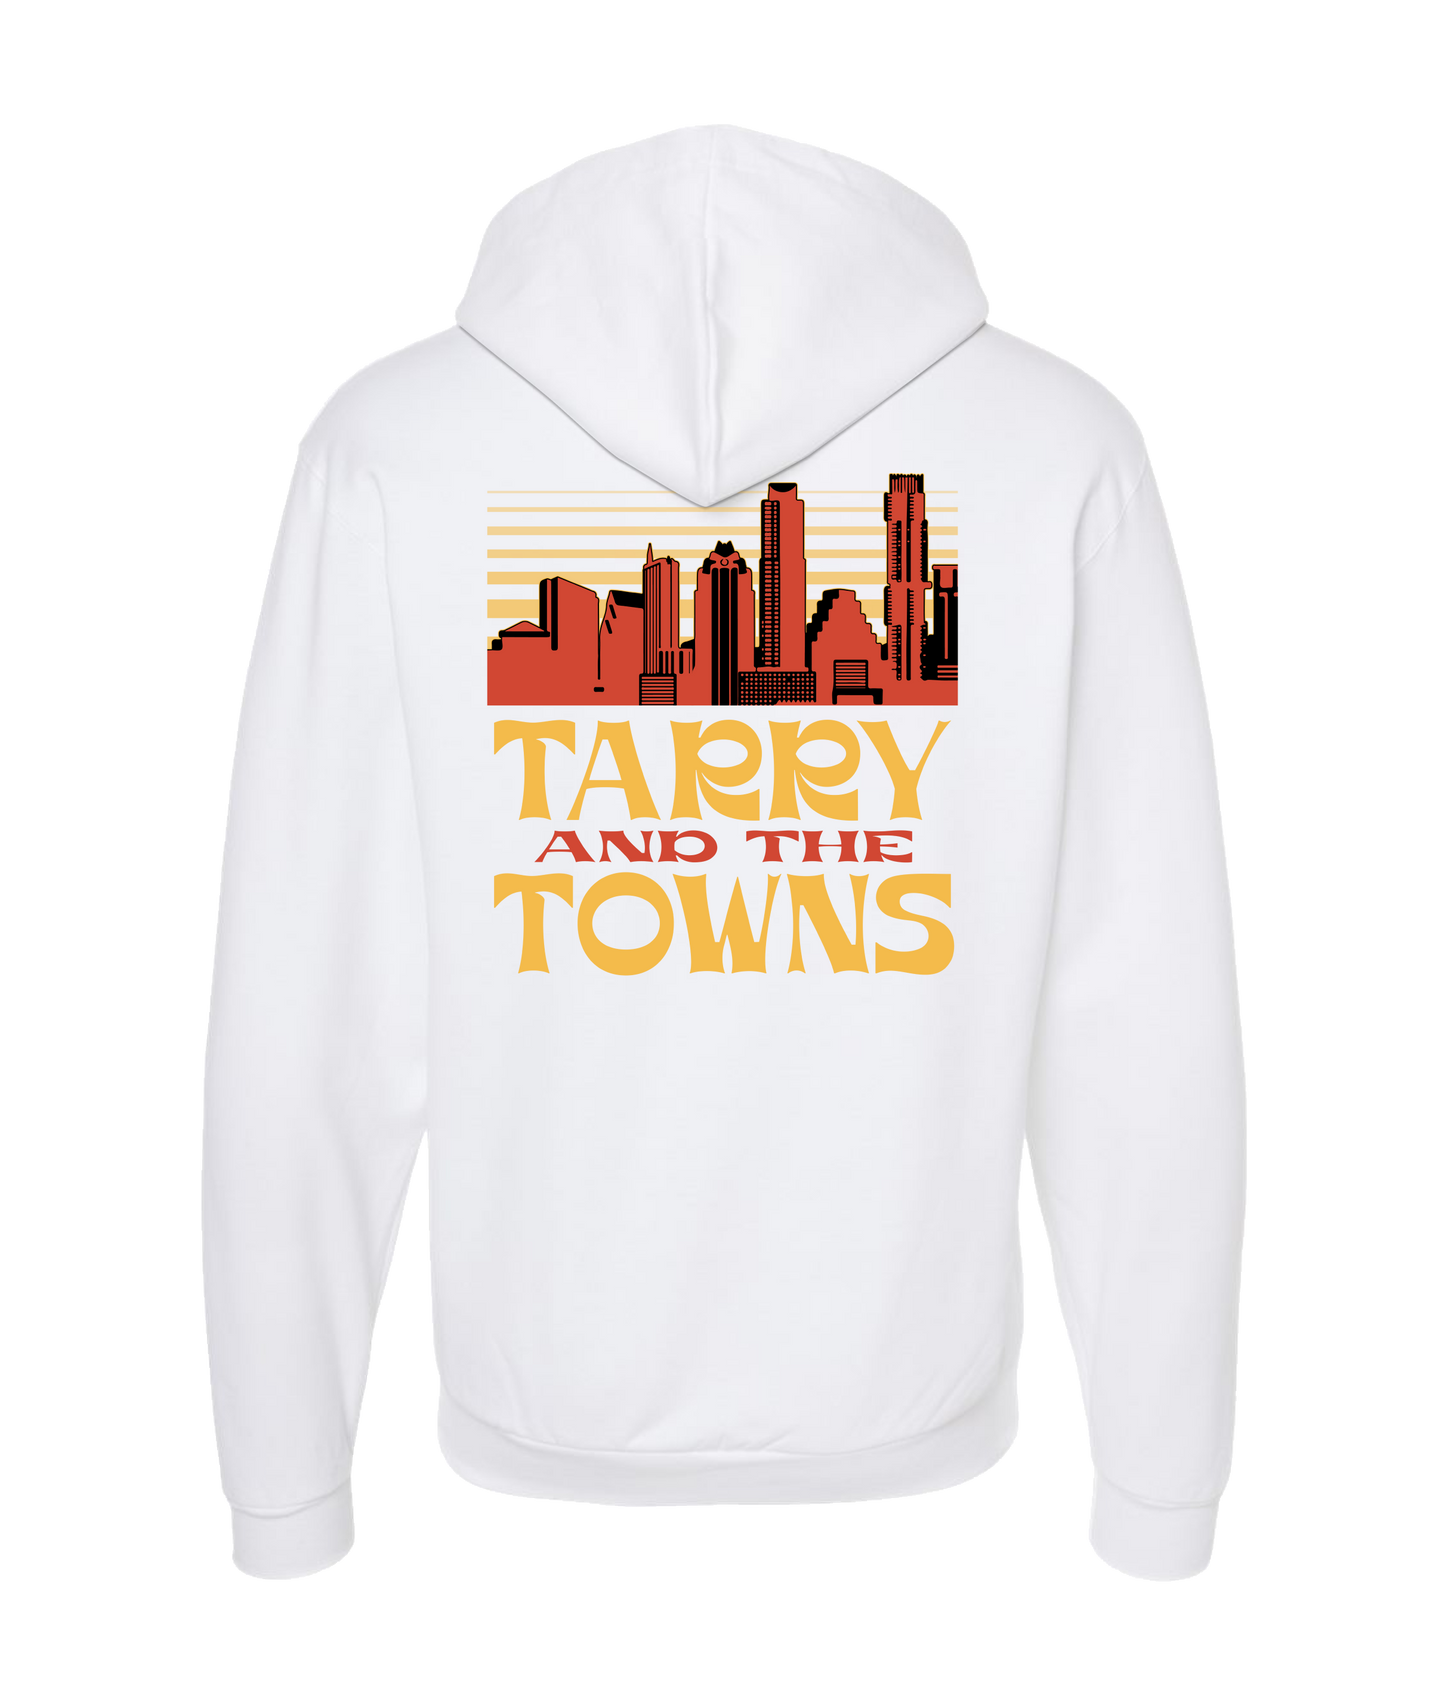 Tarry and the Towns - The 70's - White Zip Up Hoodie